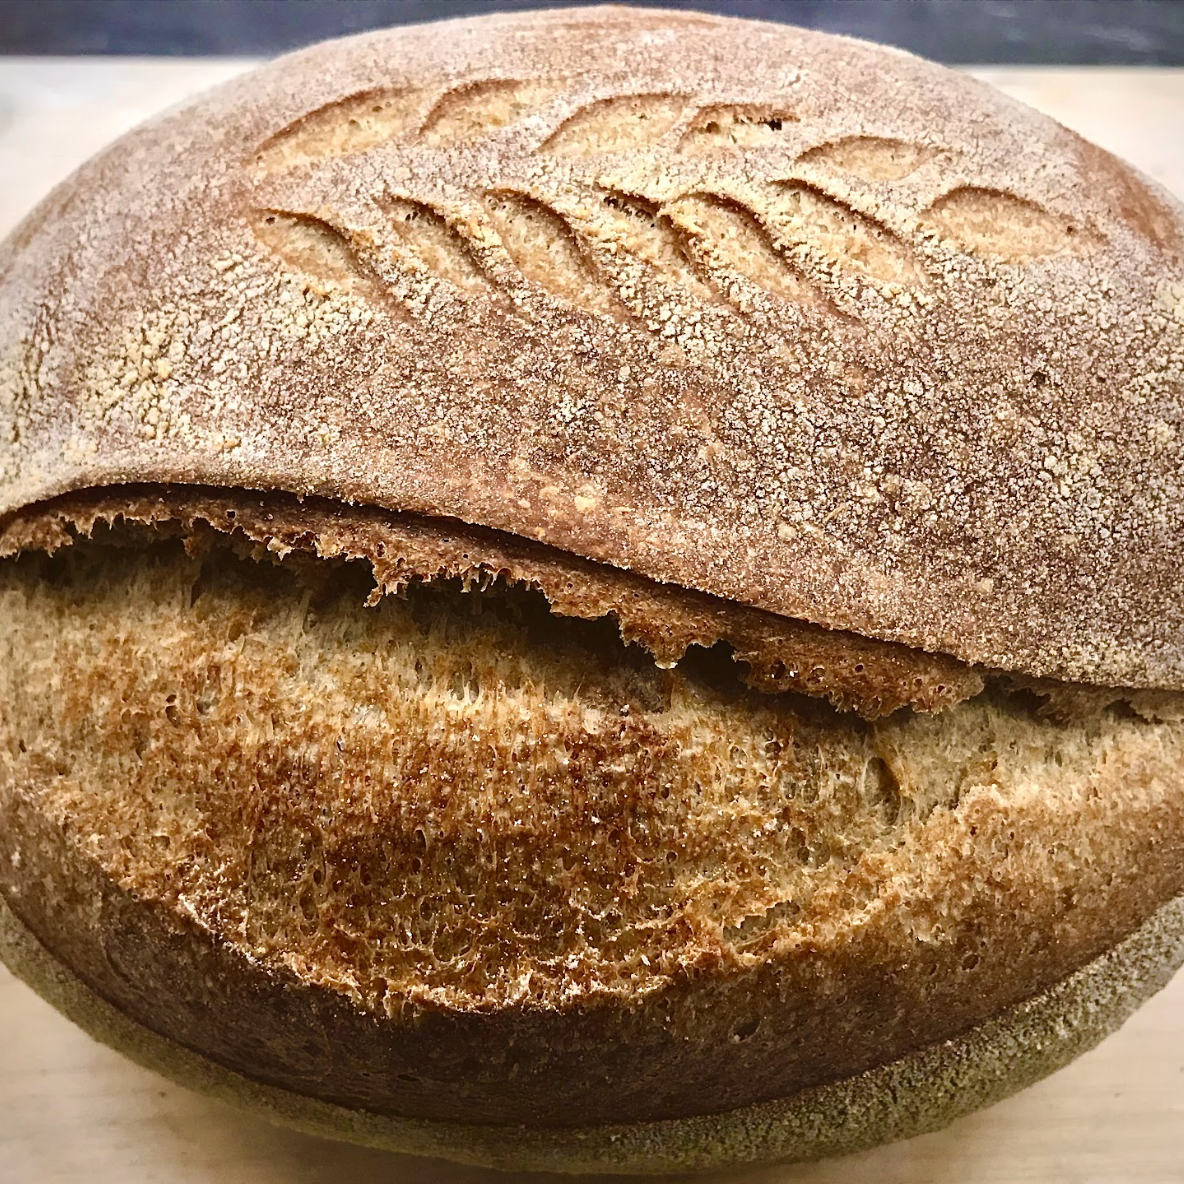 <h4>Bread</h4>
Every day Breads are Whole Wheat Loaf, Anadama Loaf, Multigrain Loaf, Country Sourdough Boule, Pain de Mie Loaf & Baguettes. 
Bread special is Seeded Sourdough, Potato Herb, Chili Crisp Focaccia, Cherry Rye, Parmesan Black Pepper, Brioche Buns